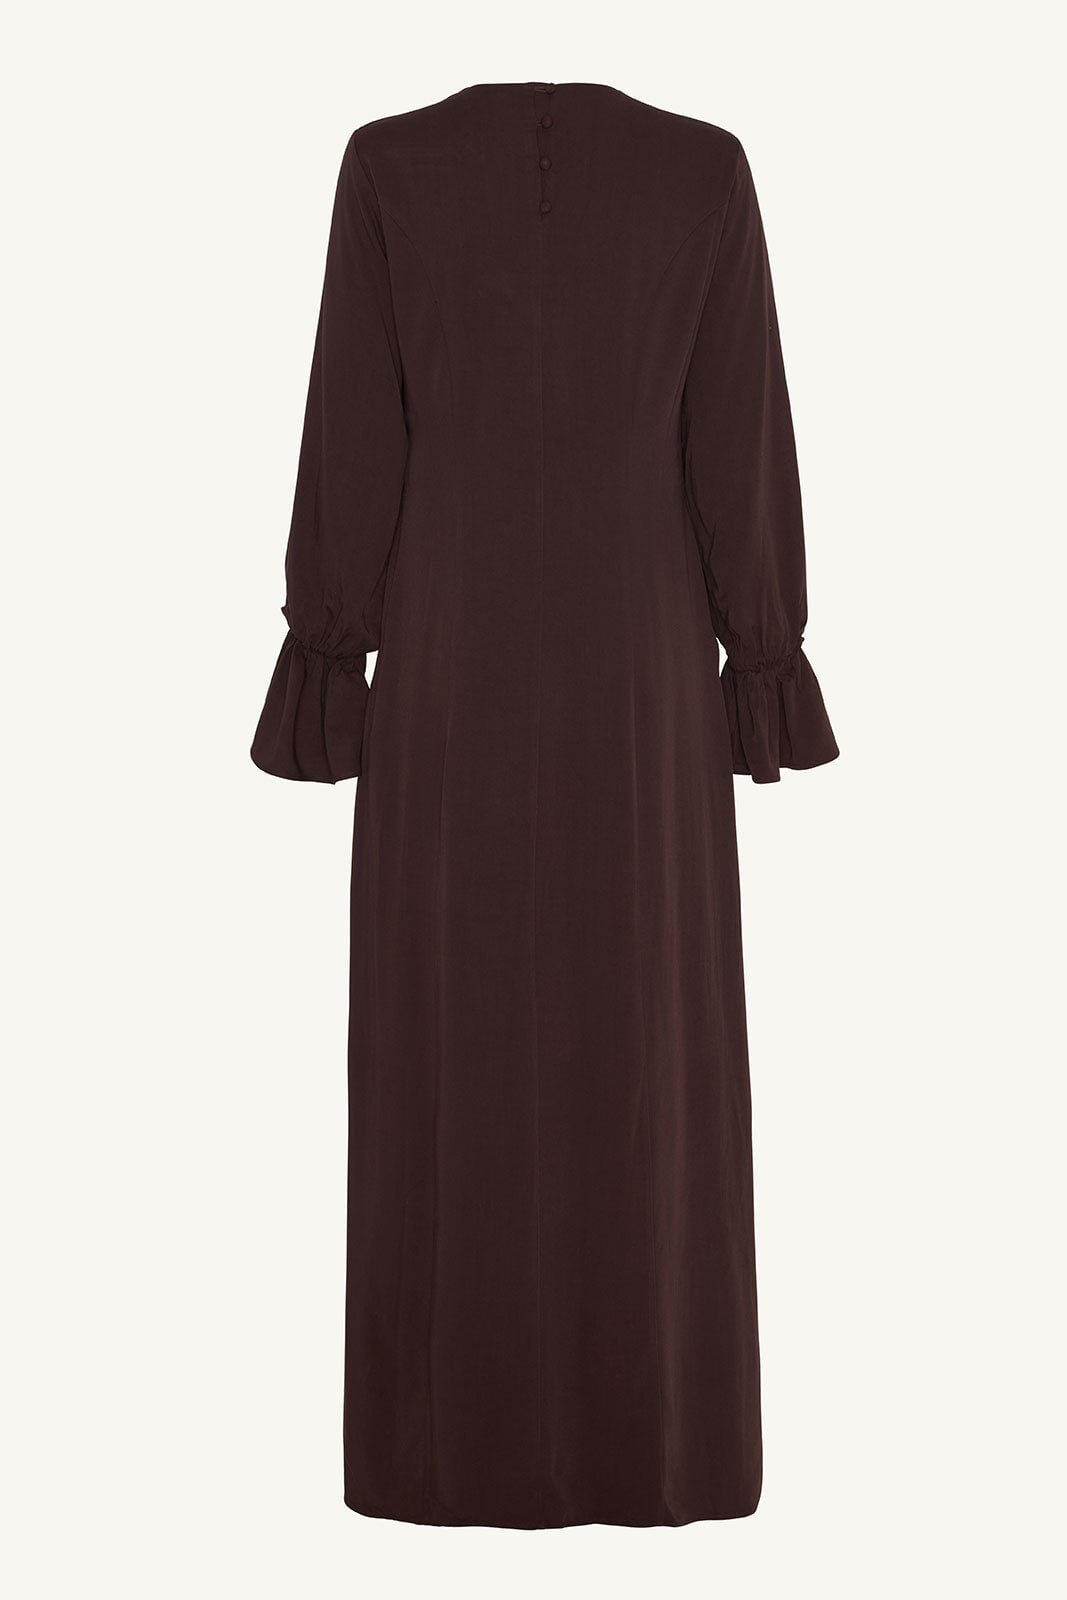 Deanna Button Front Maxi Dress - Brown Clothing Veiled 